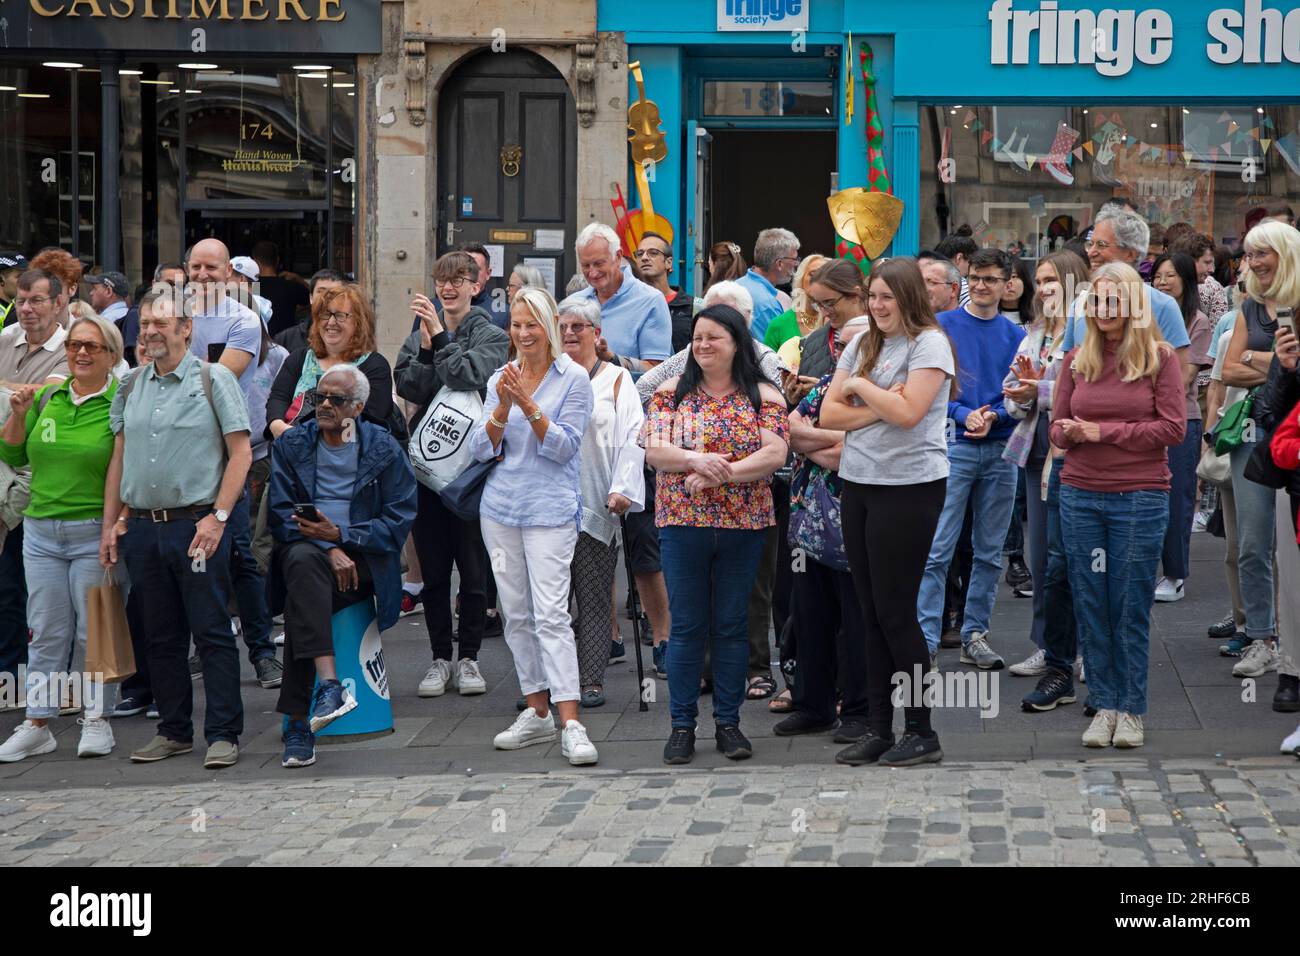 City centre, Edinburgh, Scotland, UK. 16 August 2023.  Cloudy conditions in the city centre for those visiting the Edinburgh Festival Fringe, small audiences for some street performers on the High Street. Pictured: A small audiience is entertained outside the Fring shop and office on the High Street.. Credit: Archwhite/alamy live news Stock Photo